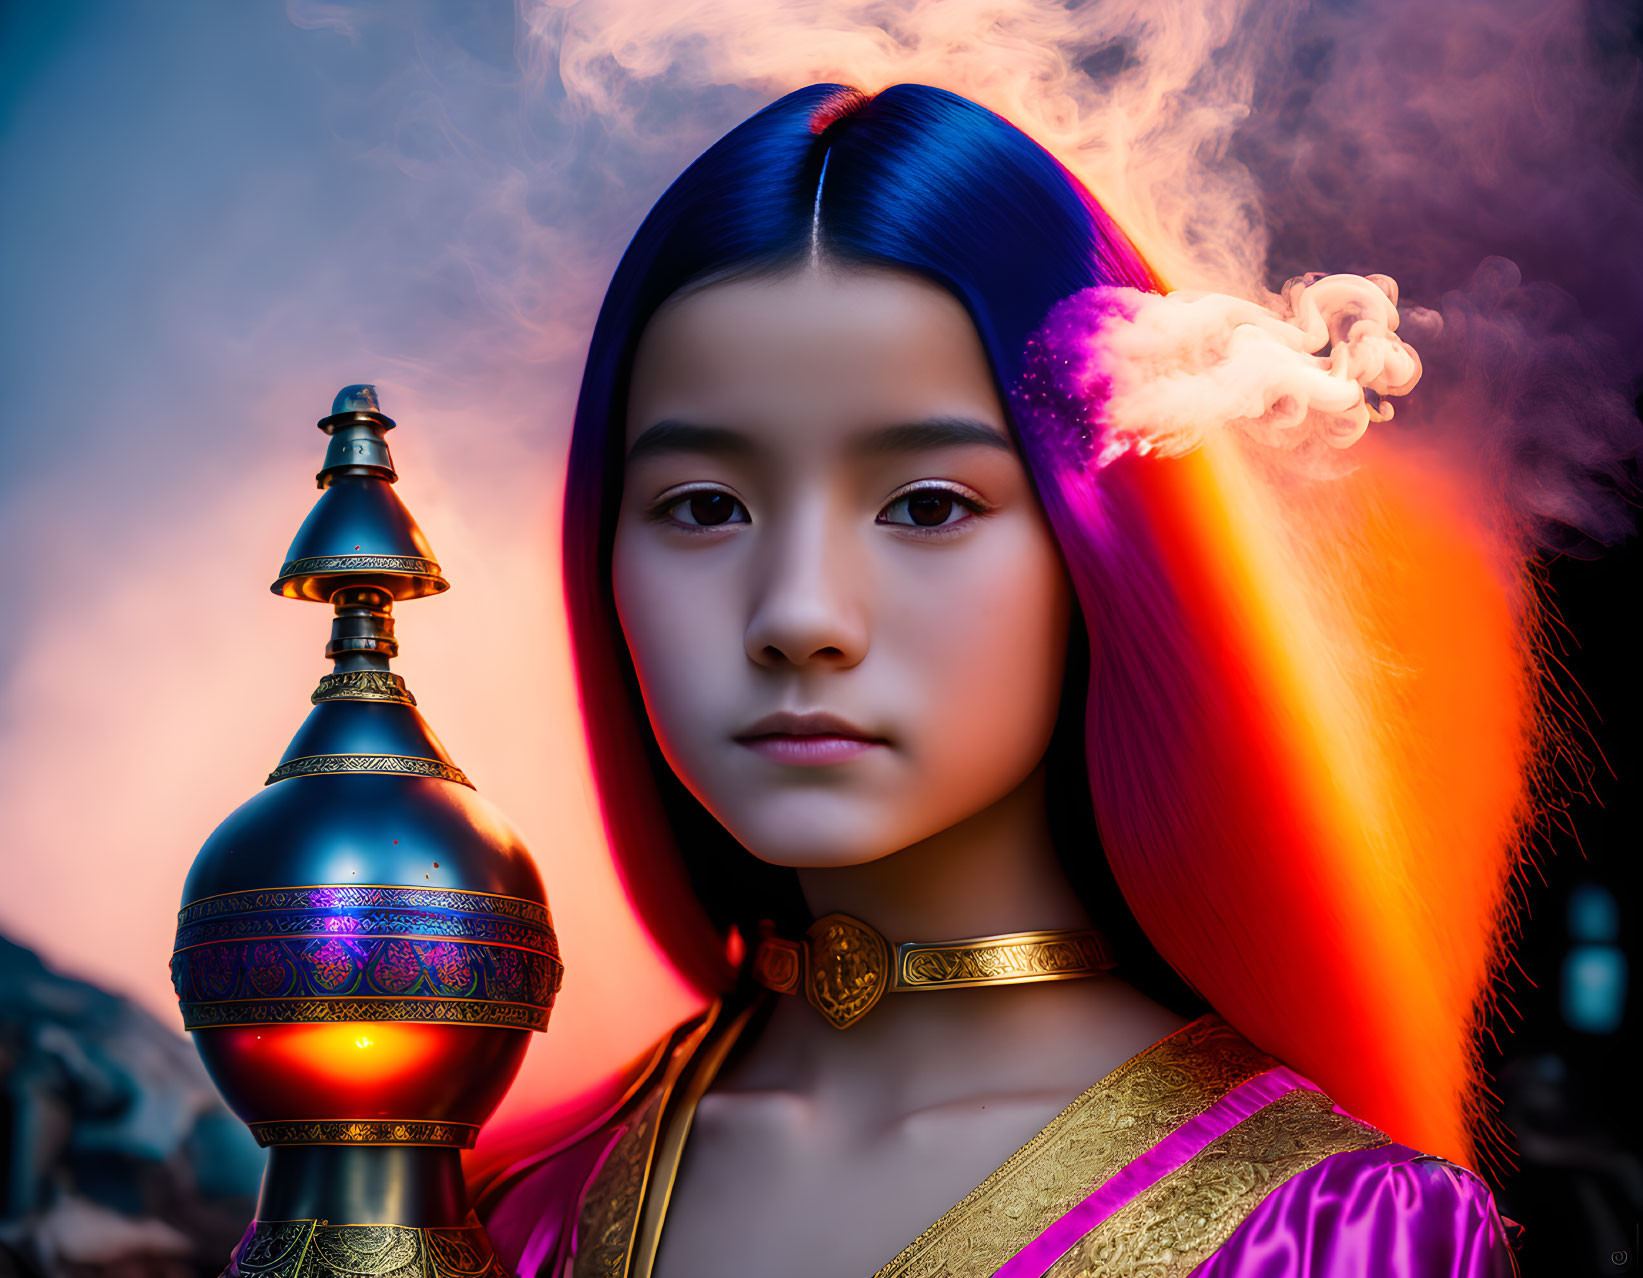 Blue-haired girl in traditional attire with ethereal smoke and decorative vessel at twilight